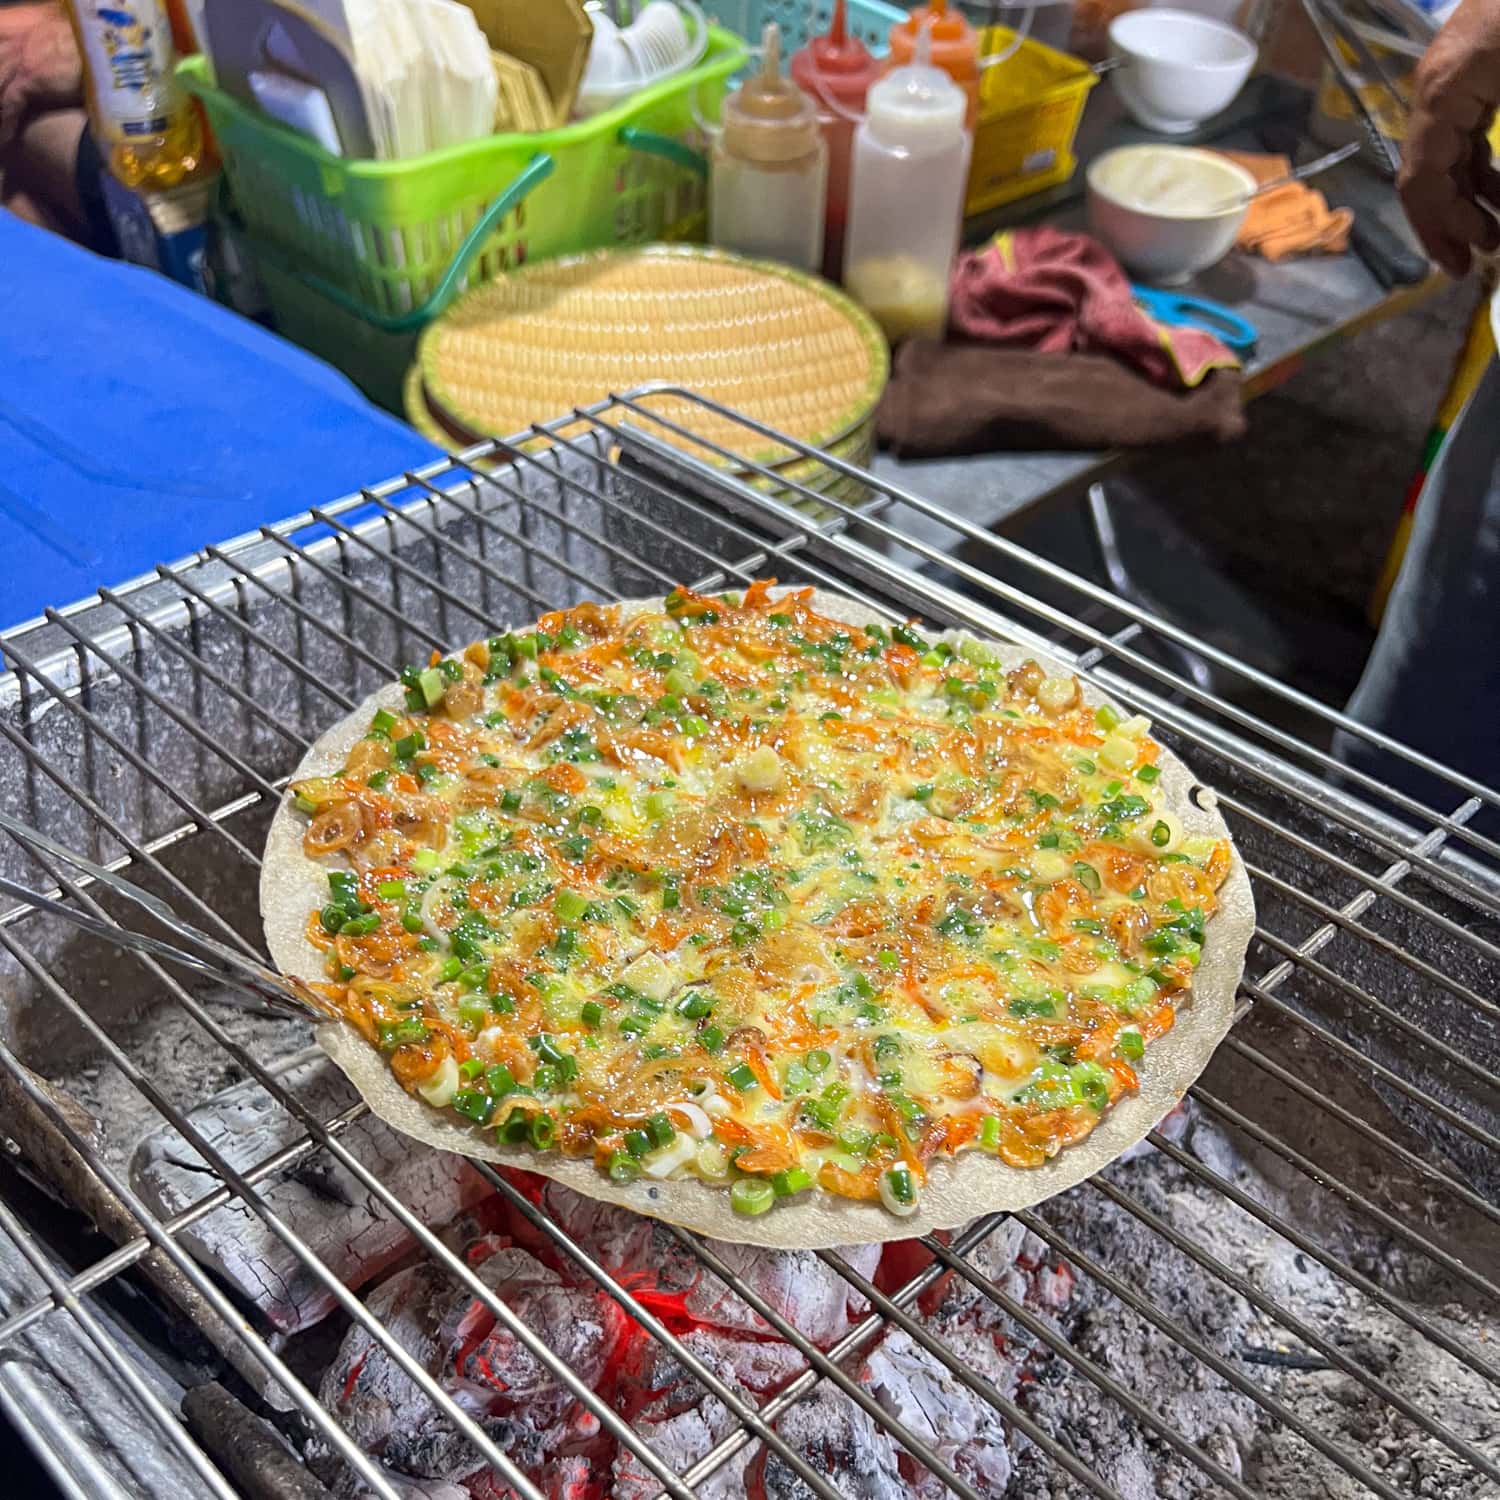 Banh trang nuong, also known as Vietnamese pizza in English, was a tasty meal on our Saigon street food tour.